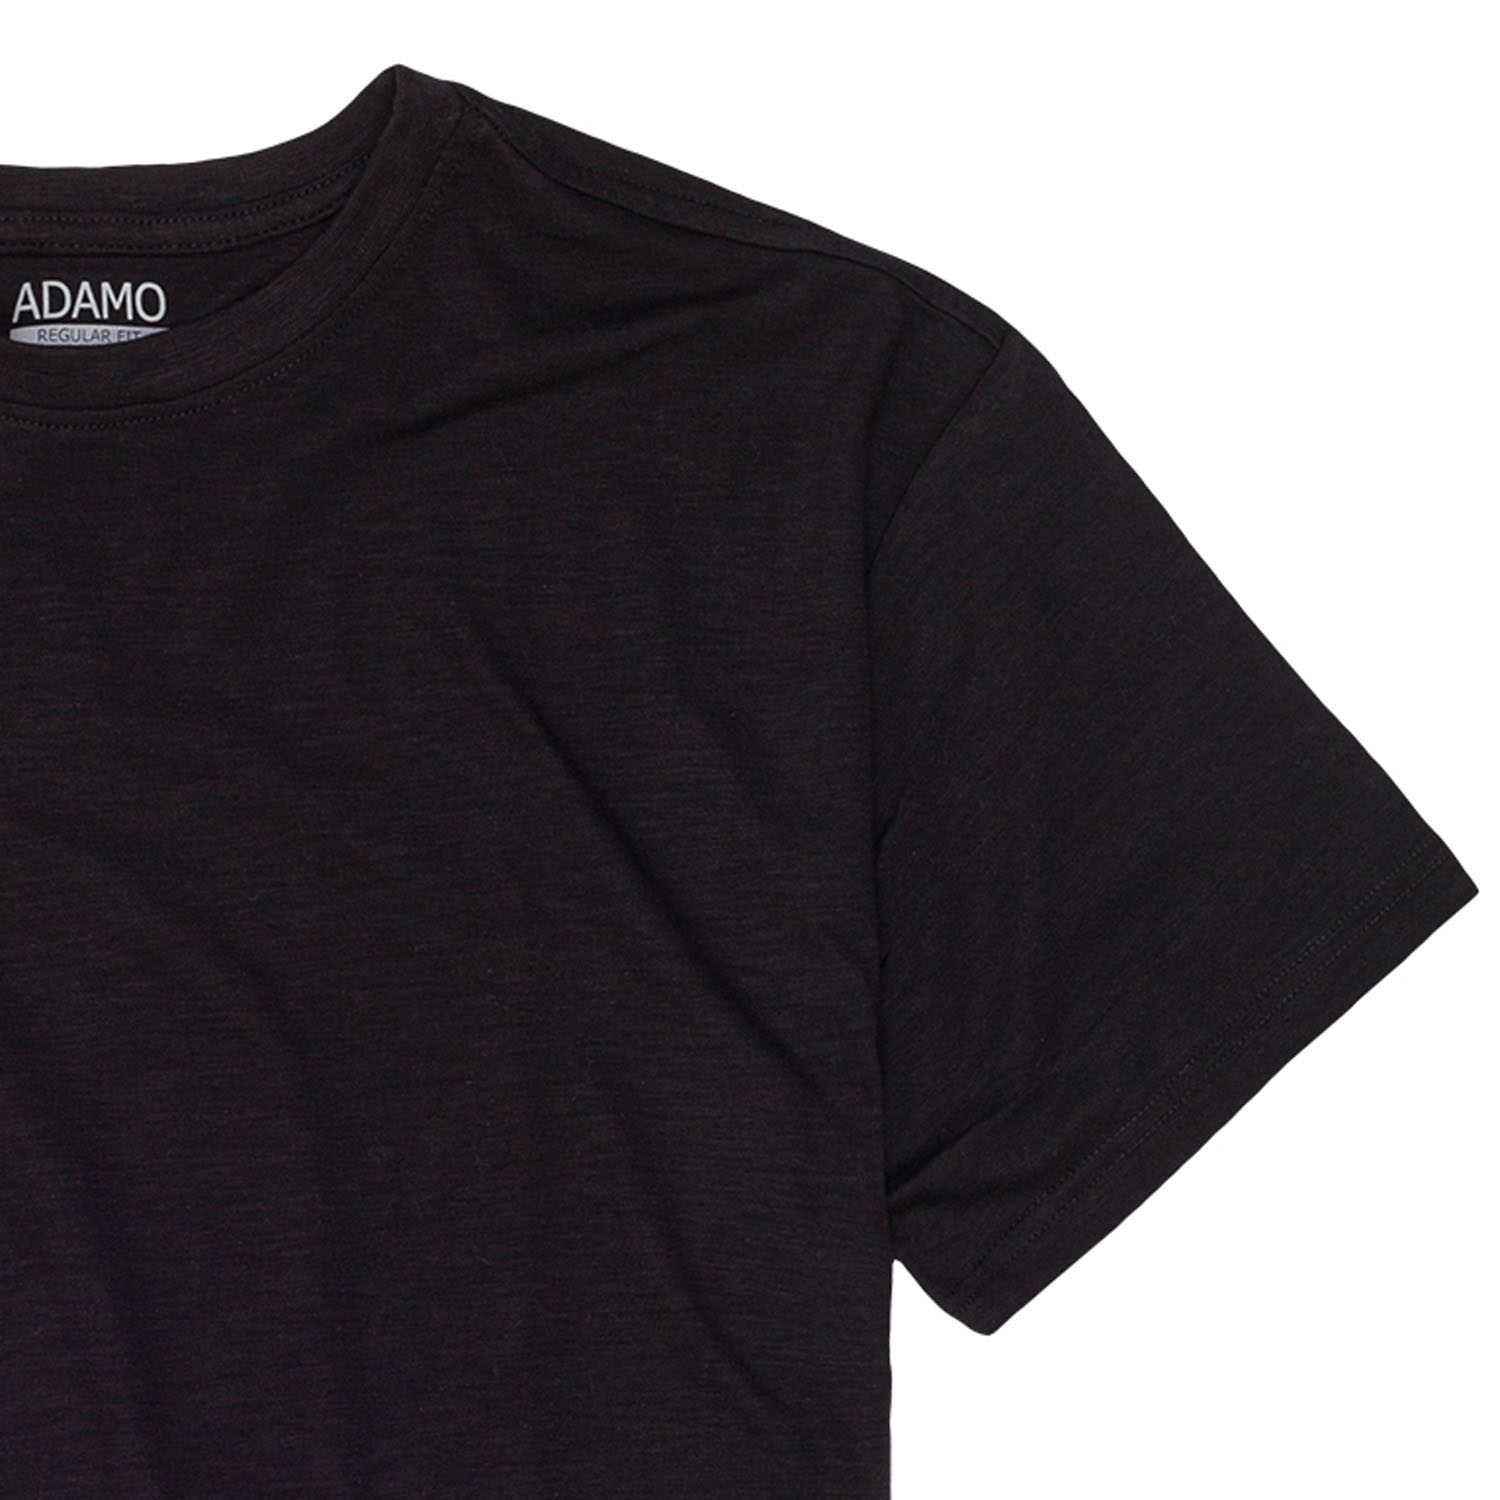 T-shirt in black series Kevin slub-effect regular fit by Adamo for men up to oversize 12XL